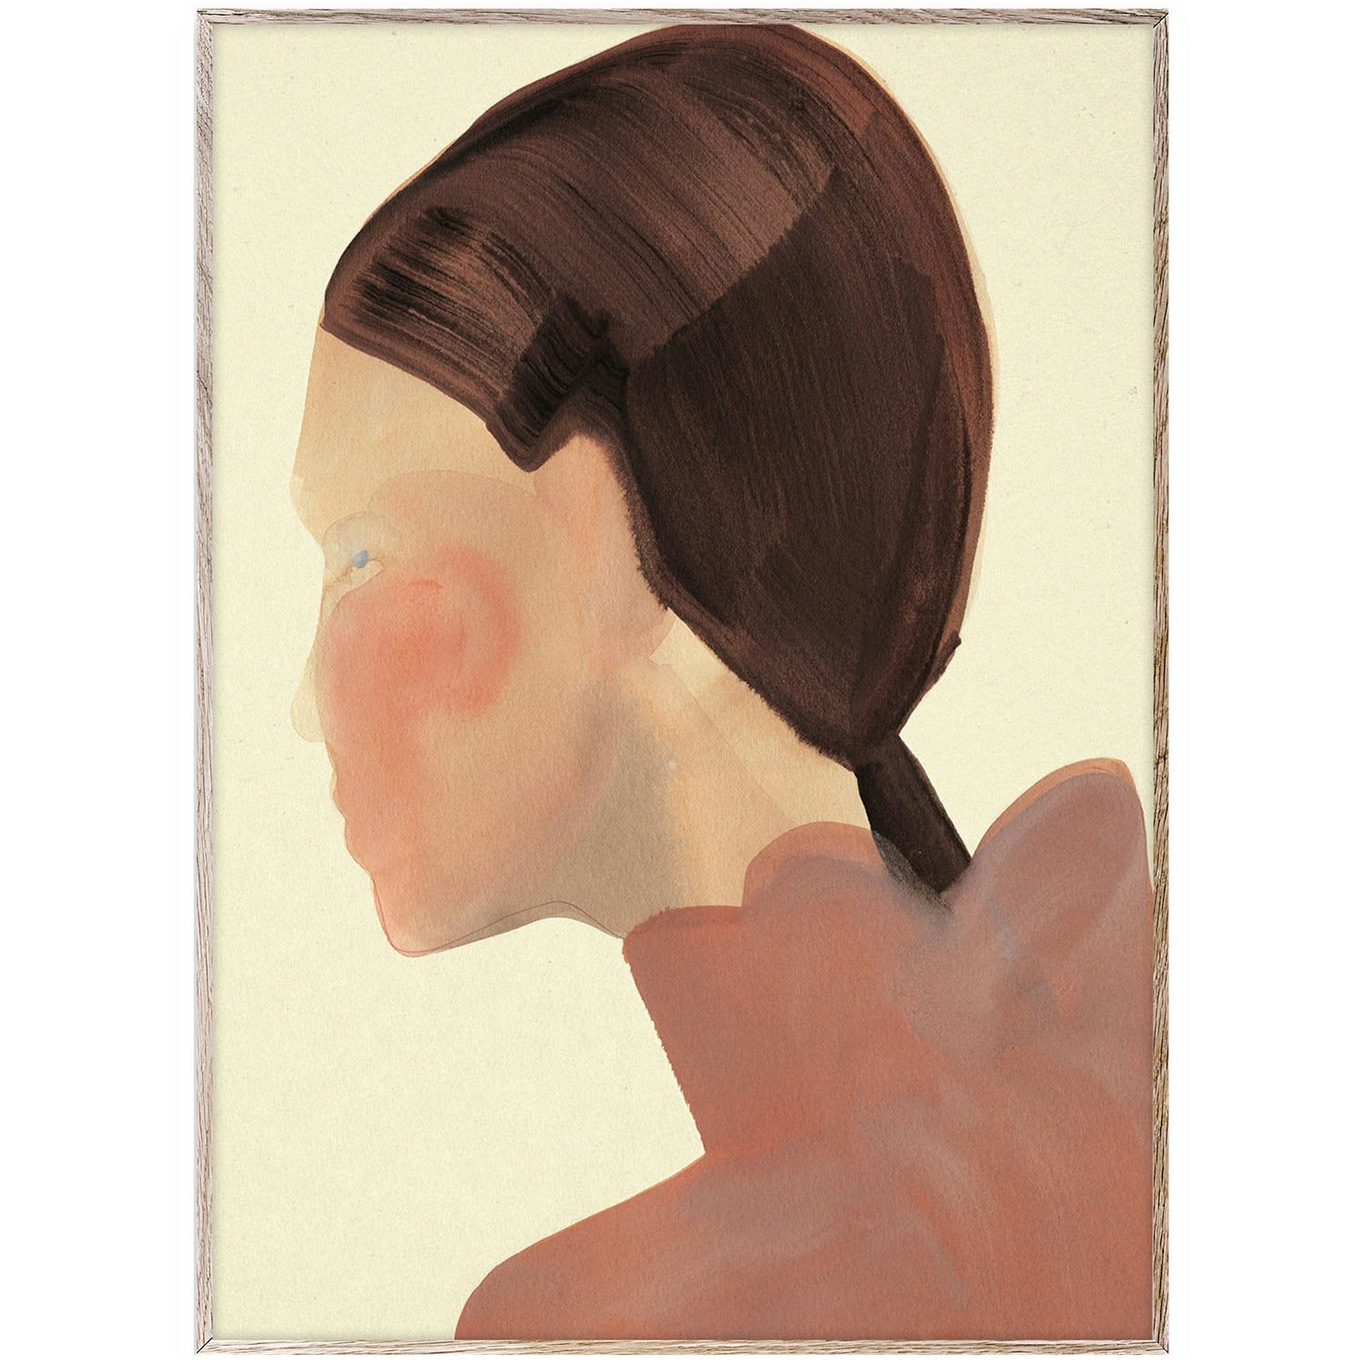 The Ponytail Poster 70x100 cm